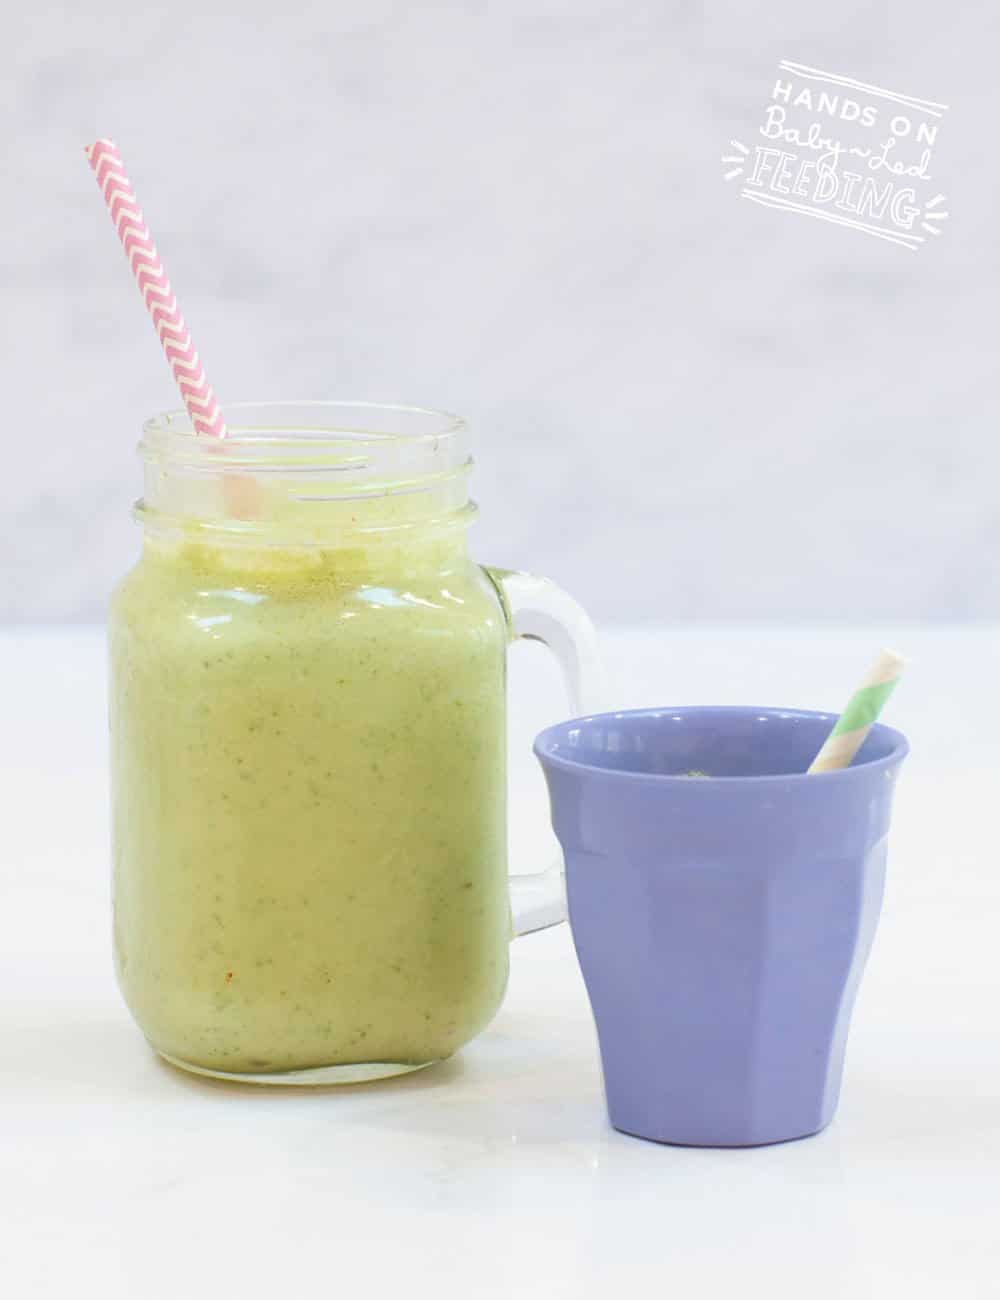 Kale-and-Pineapple-Smoothie-Recipe-Images